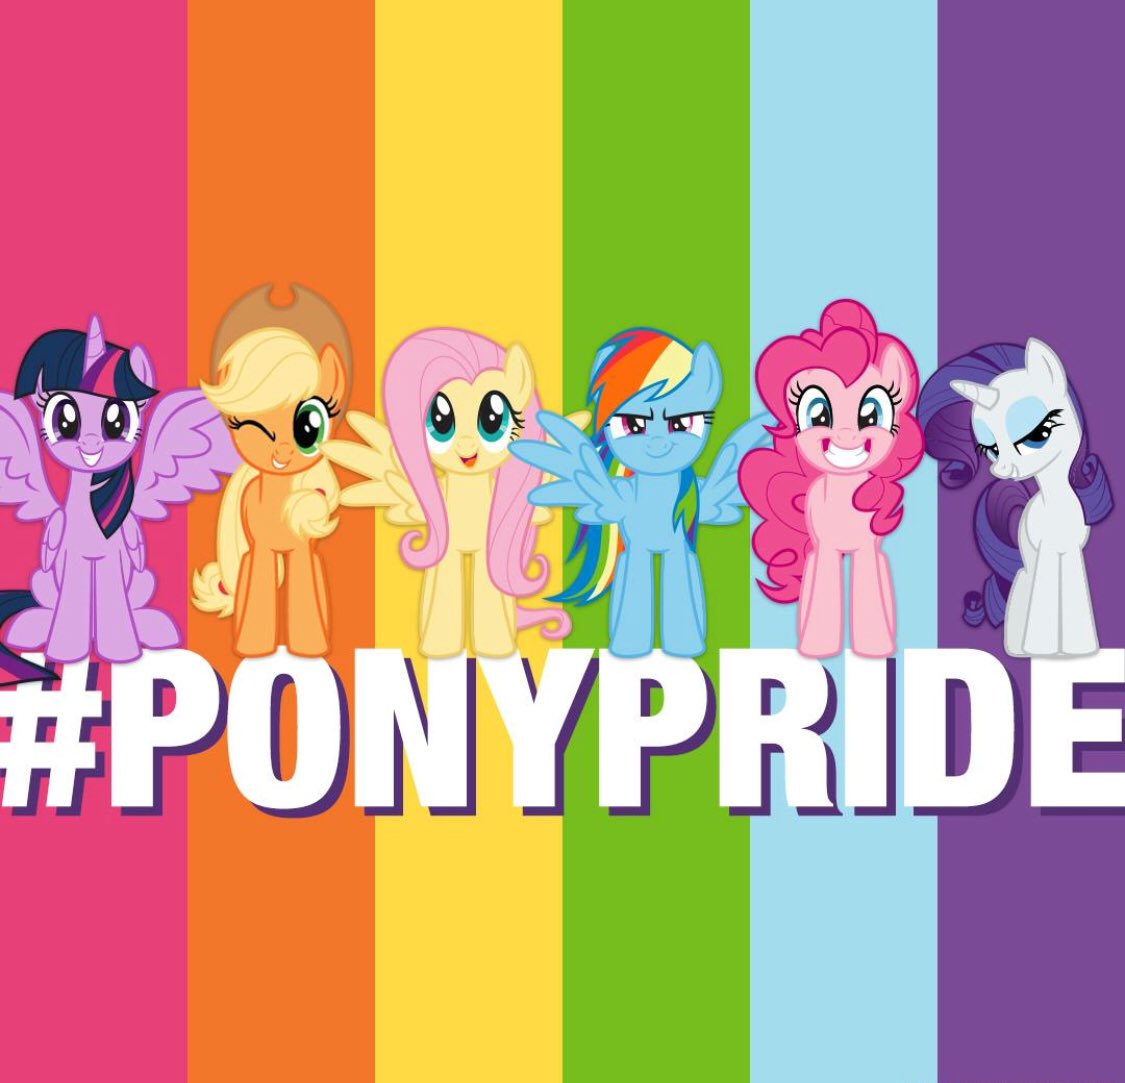 The Mane Six stand in front of a rainbow striped background. The hashtag "ponypride" is written in large letters below them.